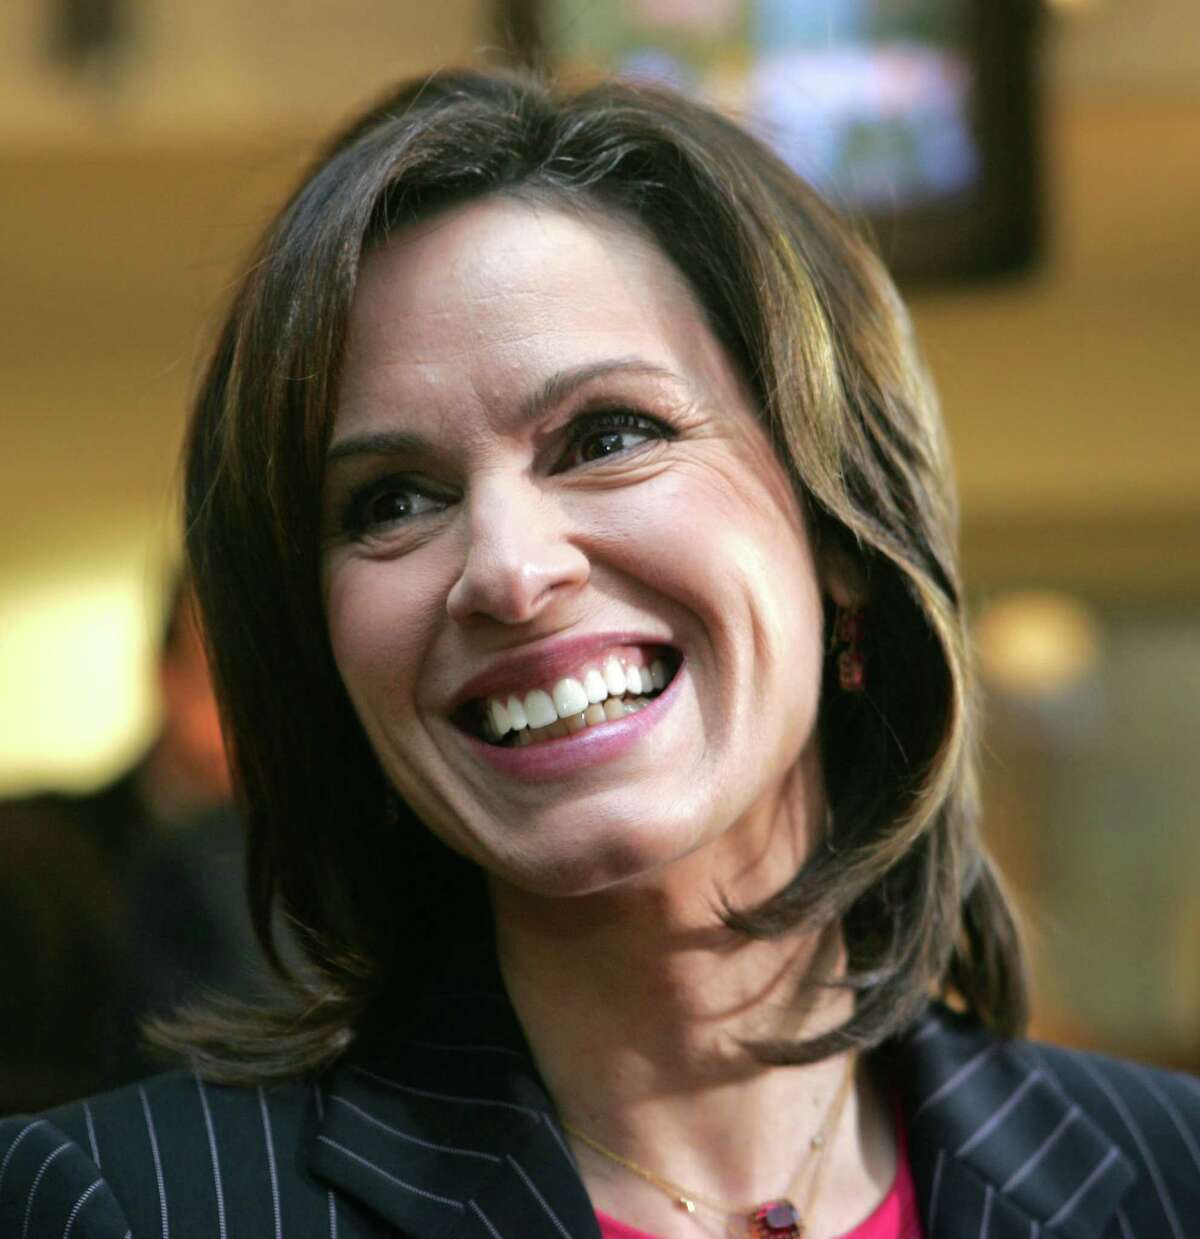 Elizabeth Vargas smiles before a news conference announcing that she and Bob Woodruff will co-anchor ABC "World News Tonight," and replace the late Peter Jennings, in a Monday, Dec. 5, 2005 file photo, in New York. ABC appointed Charles Gibson on May 23 to replace Vargas as anchor of its "World News Tonight" evening newscast. (AP Photo/Kathy Willens)